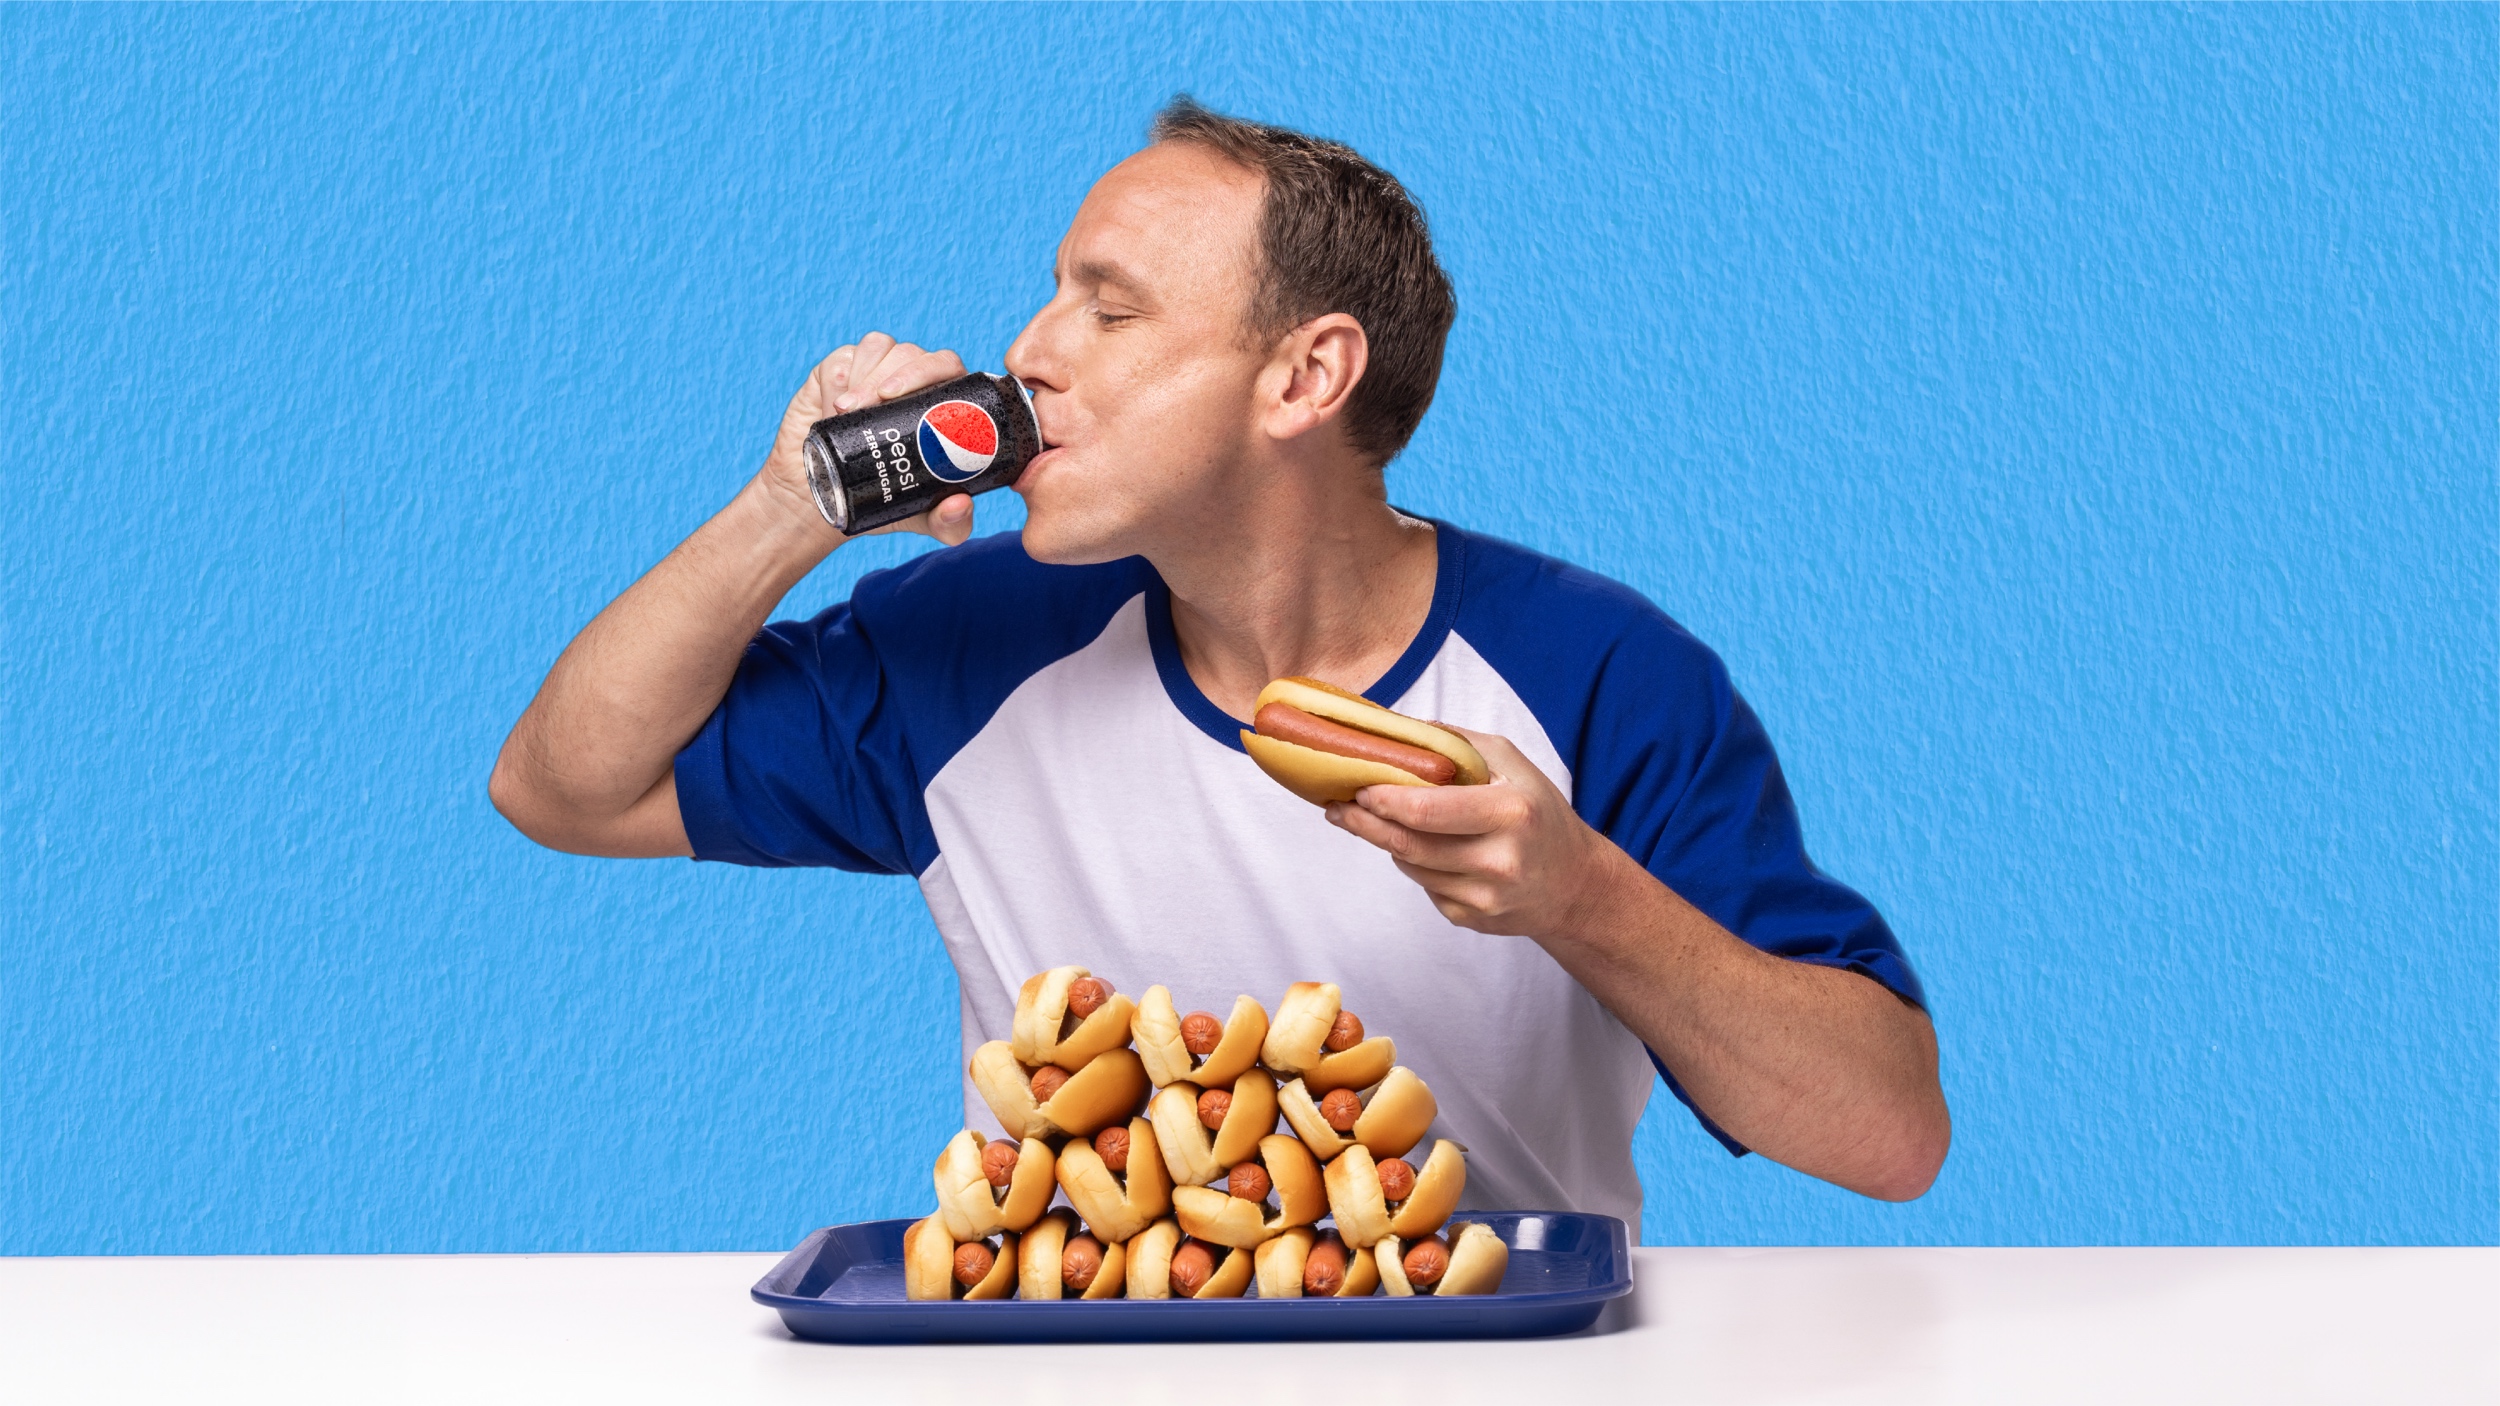 Joey Chestnut competitive eater